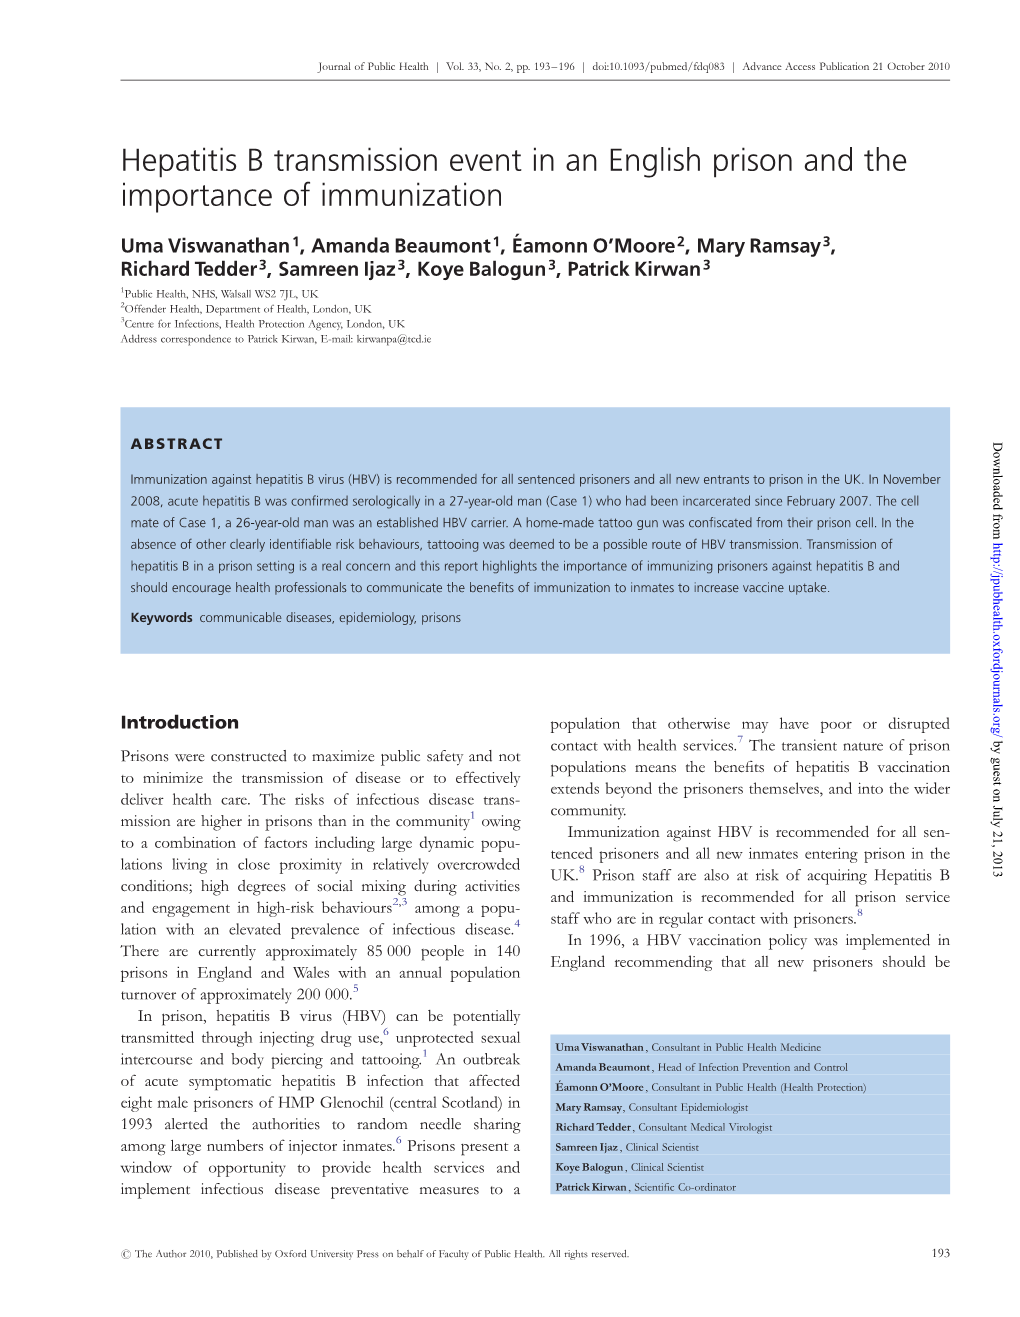 Hepatitis B Transmission Event in an English Prison and the Importance of Immunization